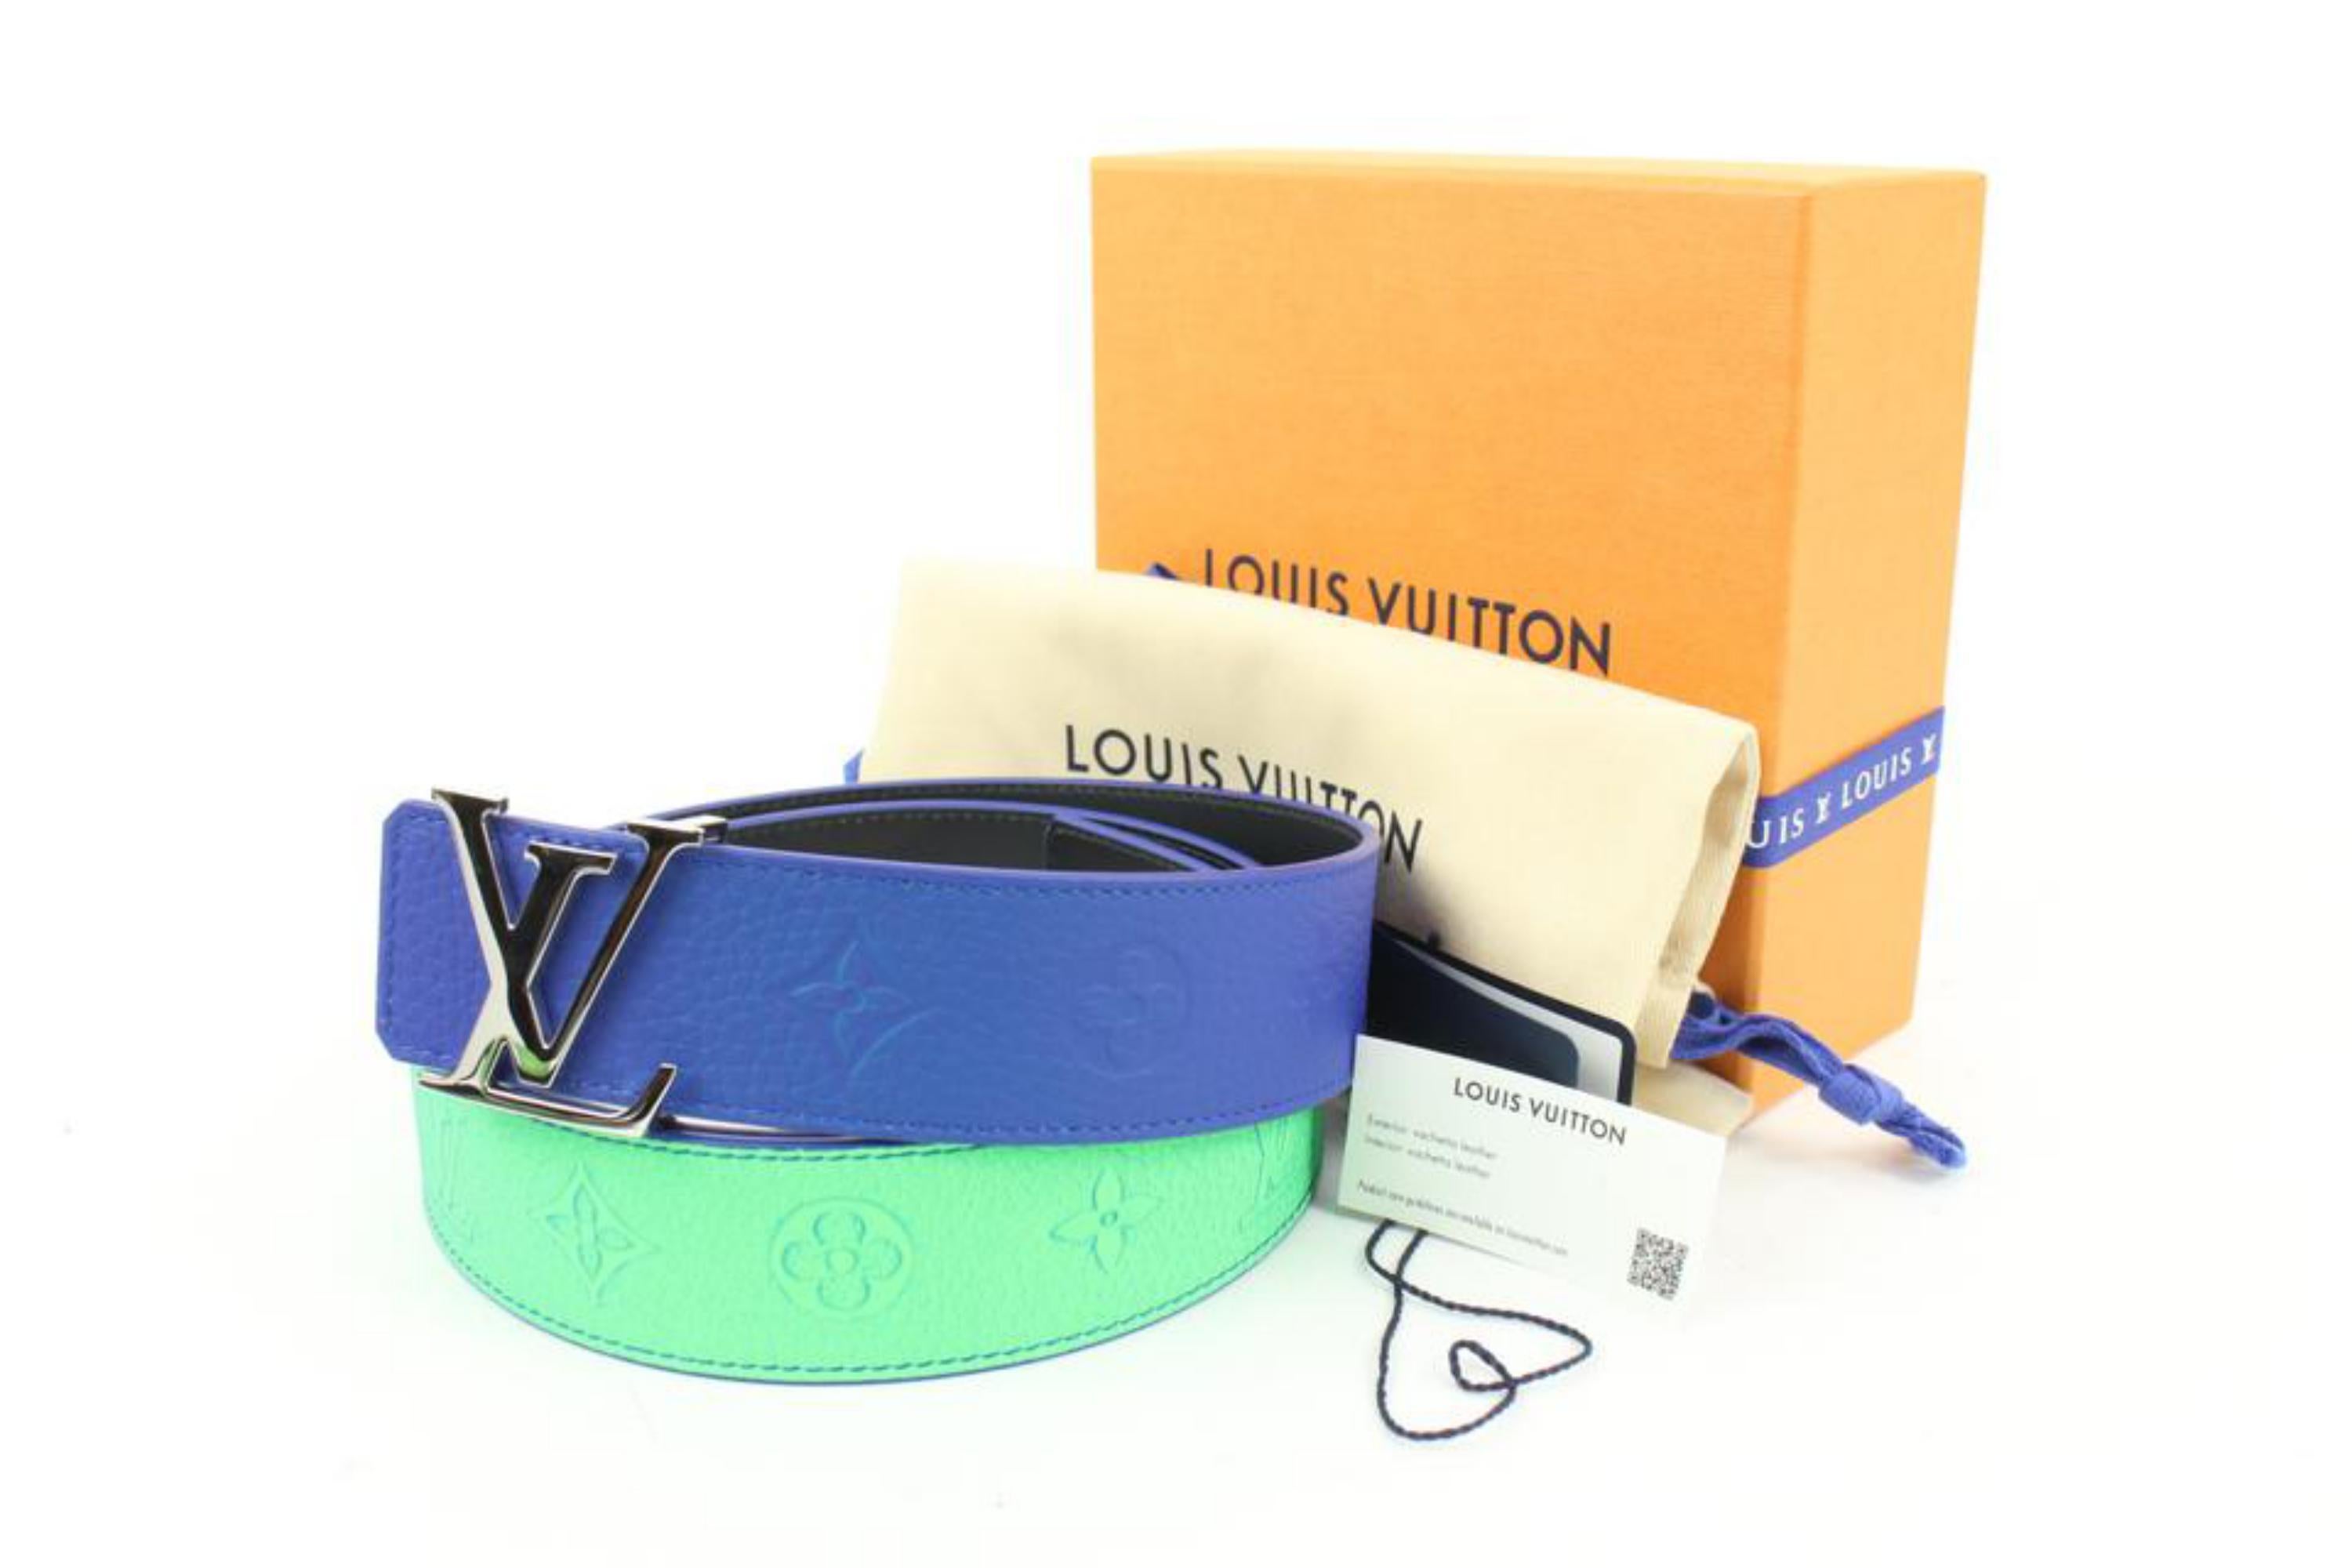 Louis Vuitton 110/44 Monogram Illusion Leather 40MM Initials Reversible Belt 34l128s
Date Code/Serial Number: BC0212
Made In: Spain
Measurements: Length:  50.75